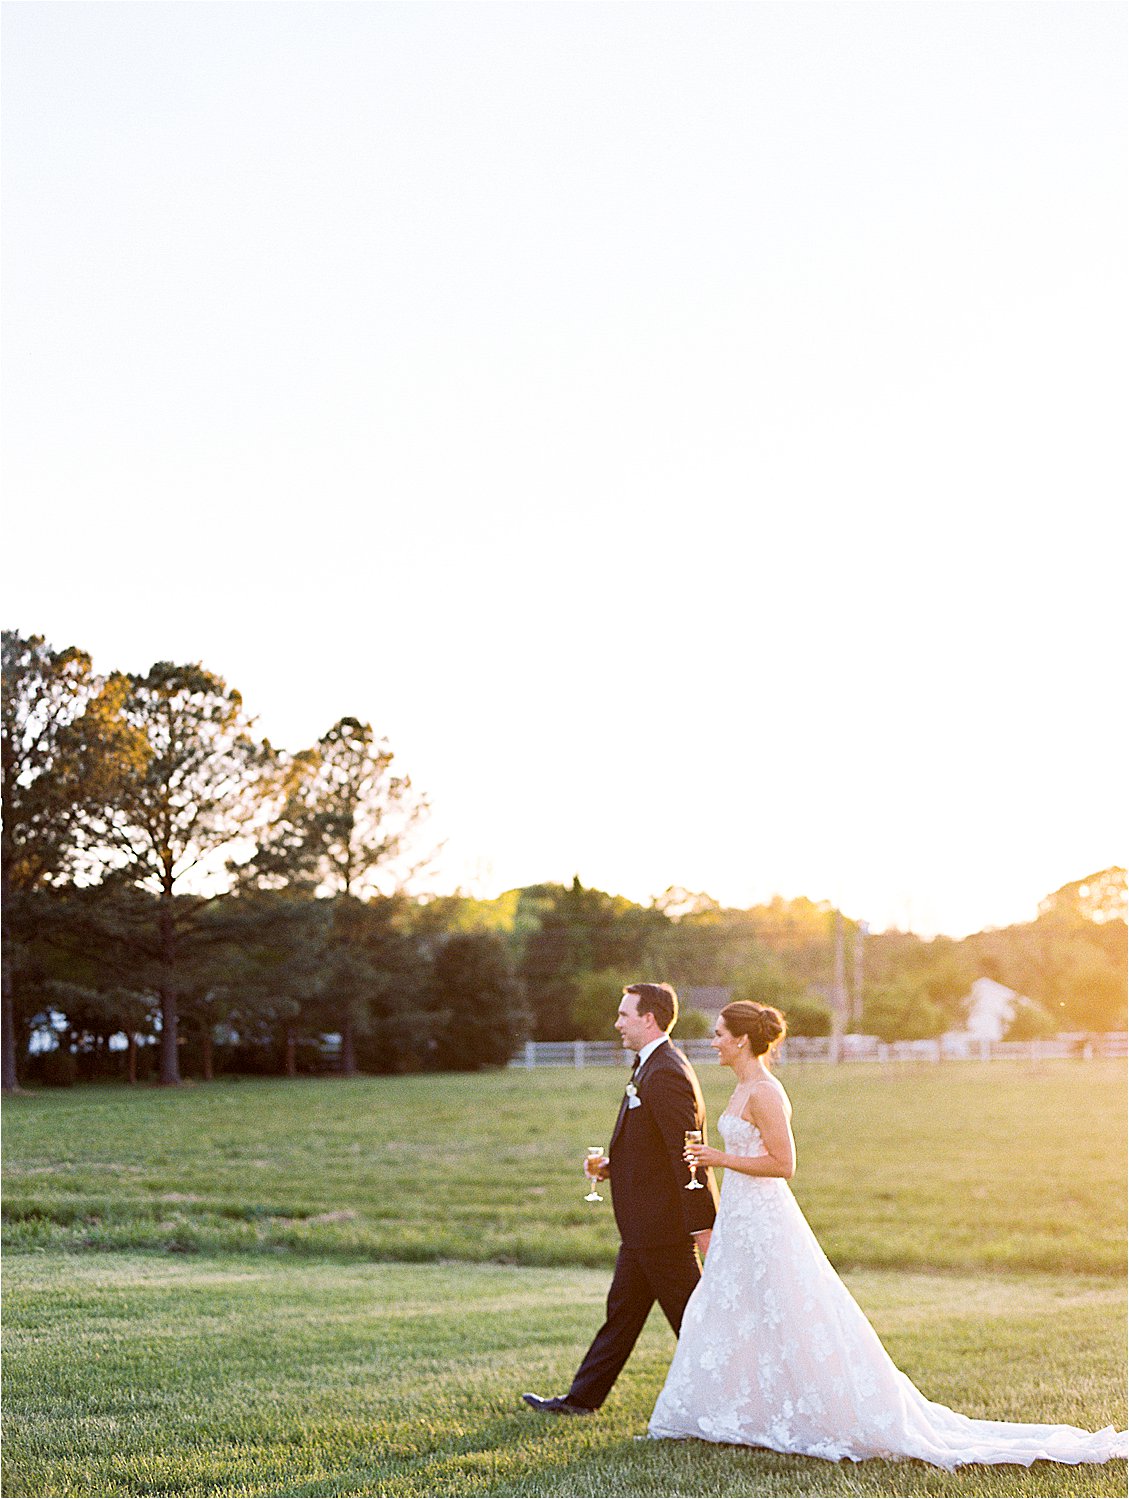 Golden hour wedding portraits at Inn at Perry Cabin in St. Michaels, Maryland